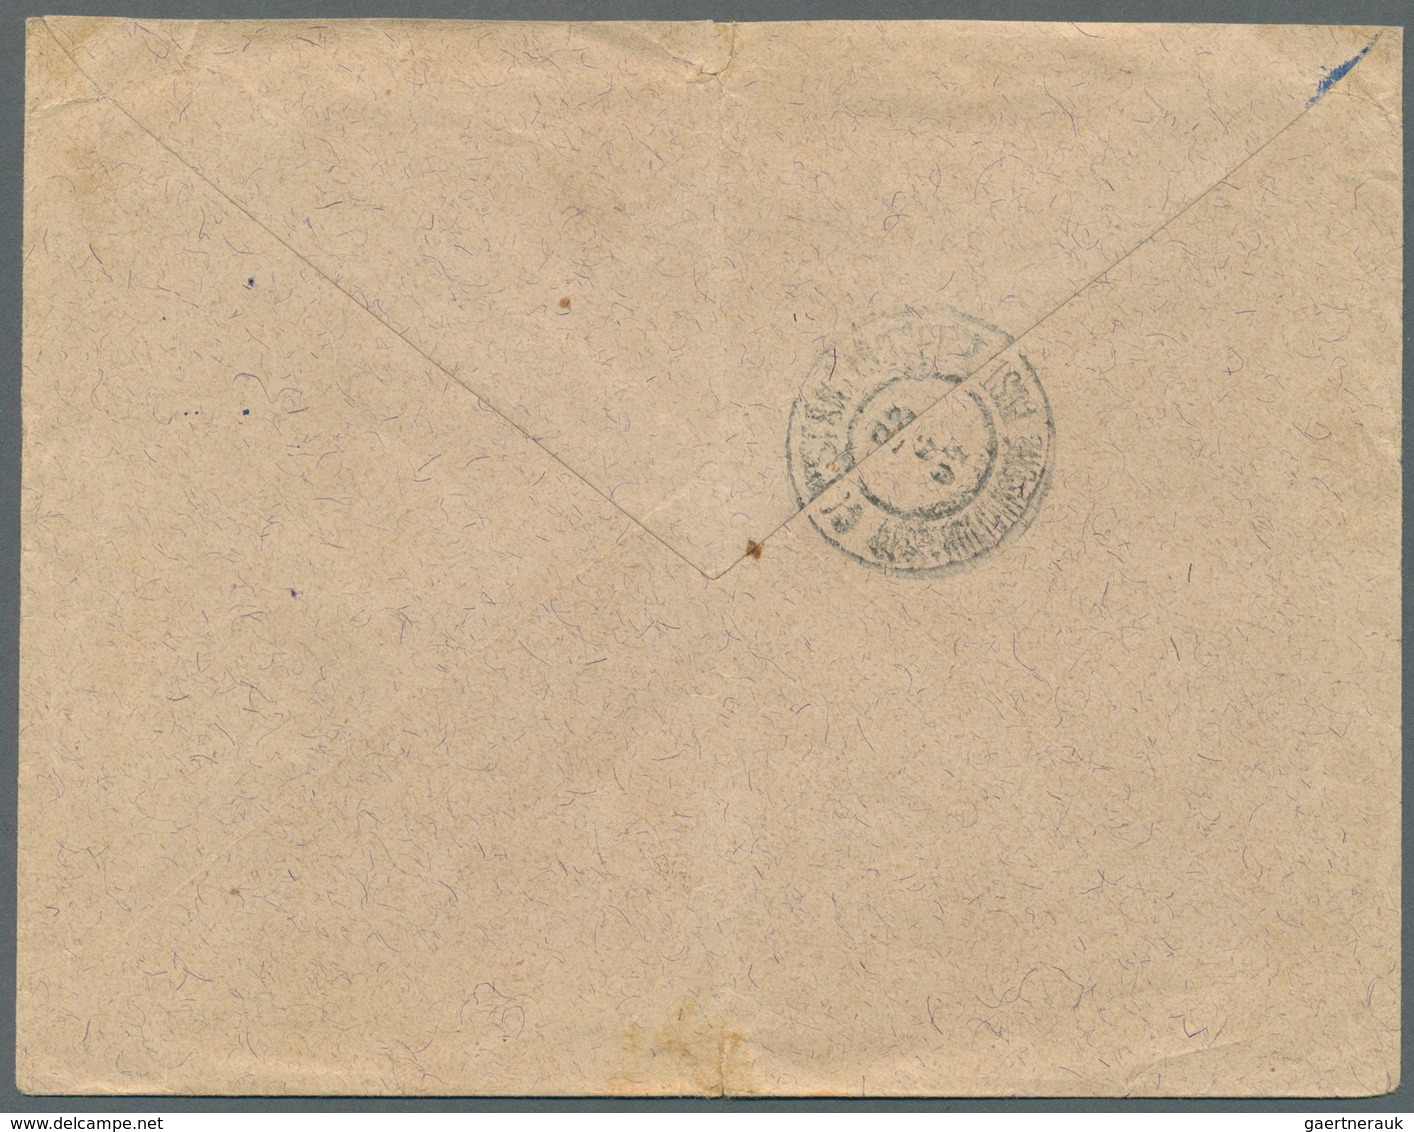 13461 Bulgarien: 1904 Cover To Constantinopel, Franked With 25 S Tsar Ferdinand Issue, Prepaying Th UPU Le - Lettres & Documents